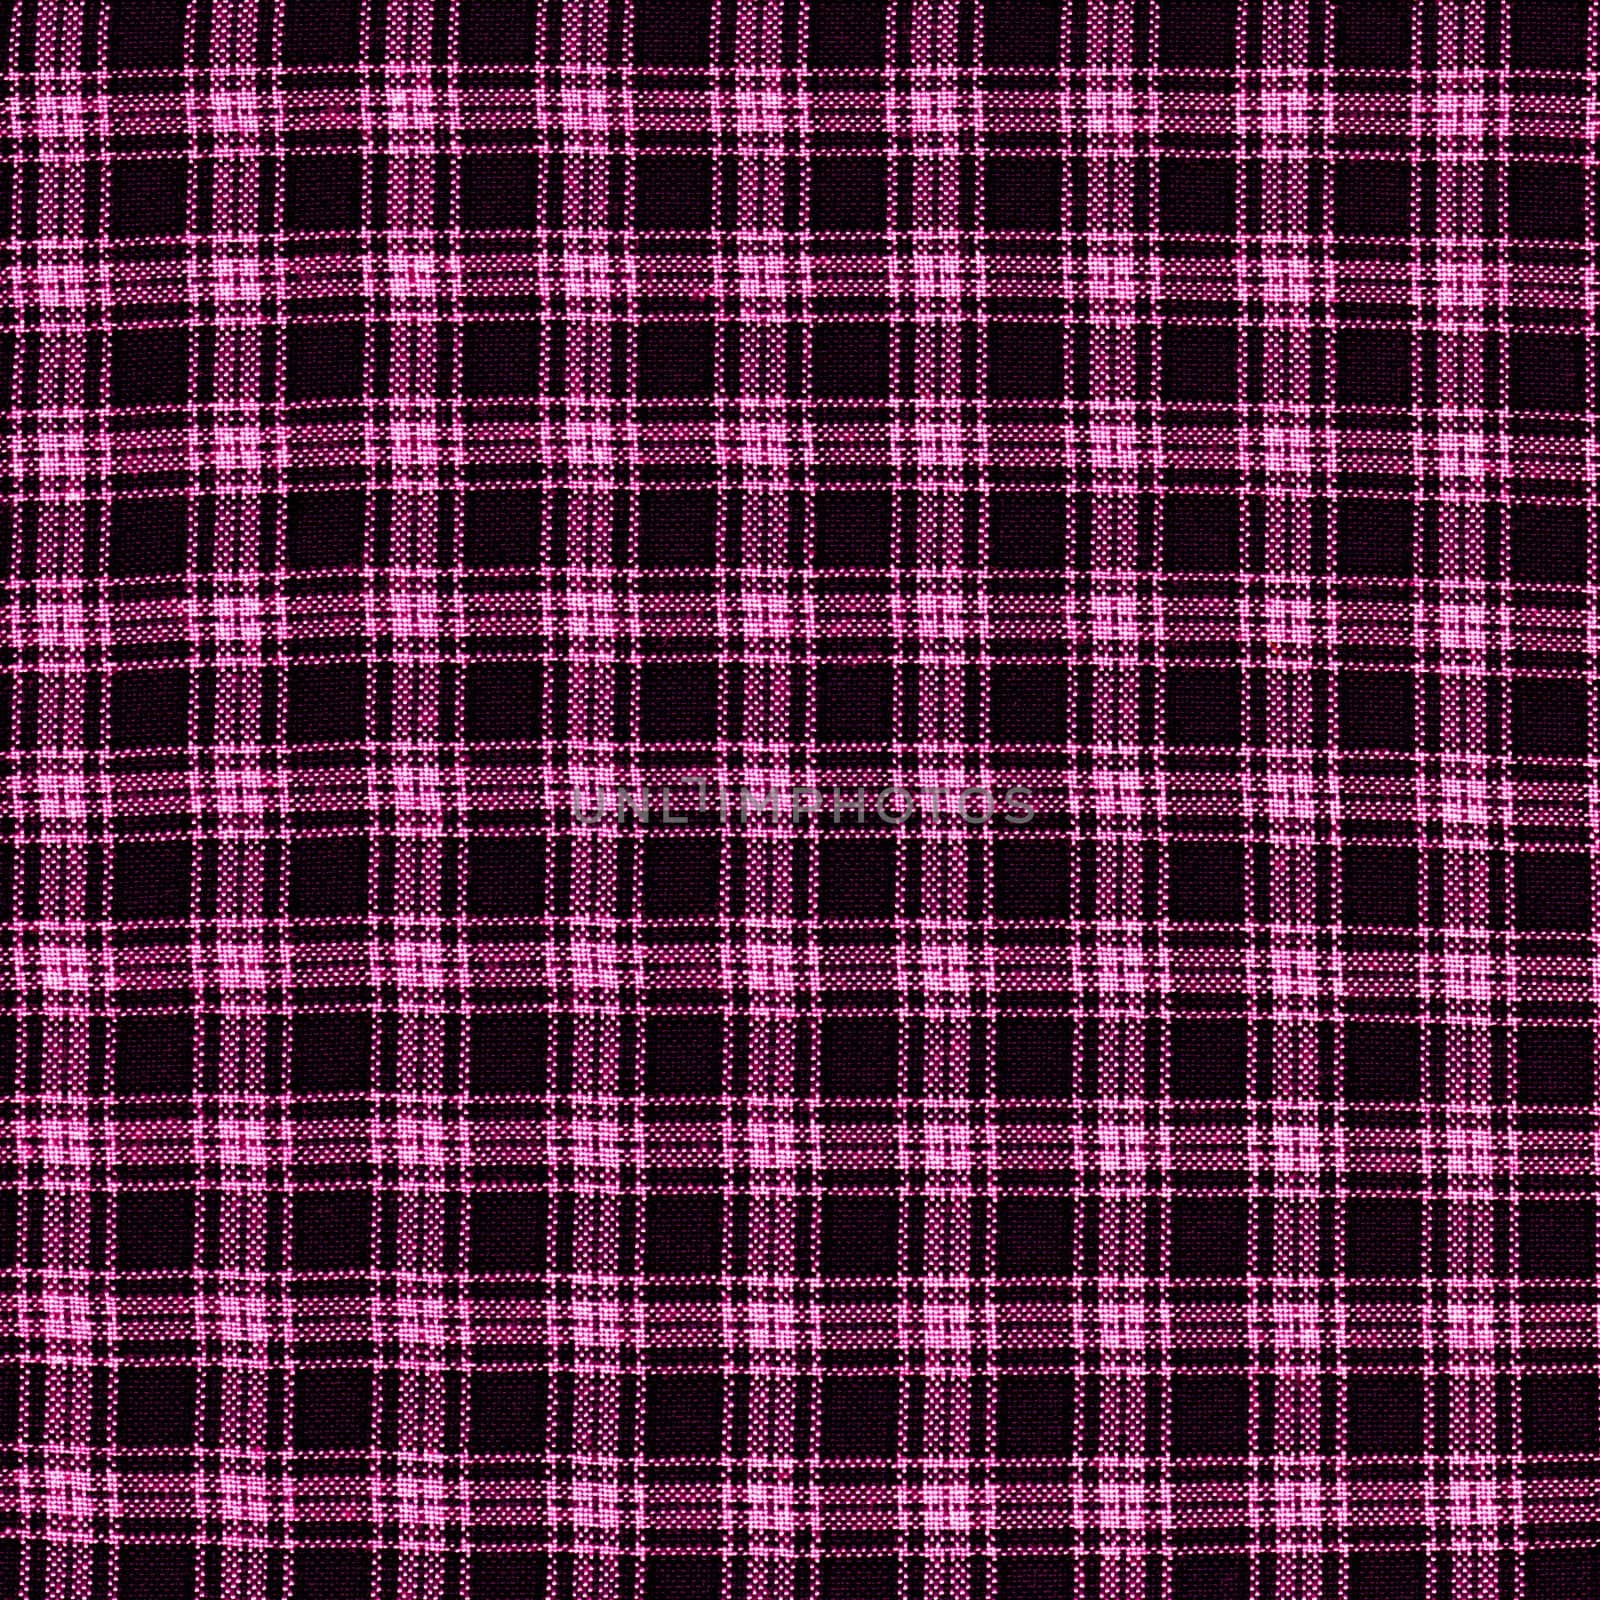 Black-pink plaid pattern fabric texture. (High.res.scan.) by mg1408